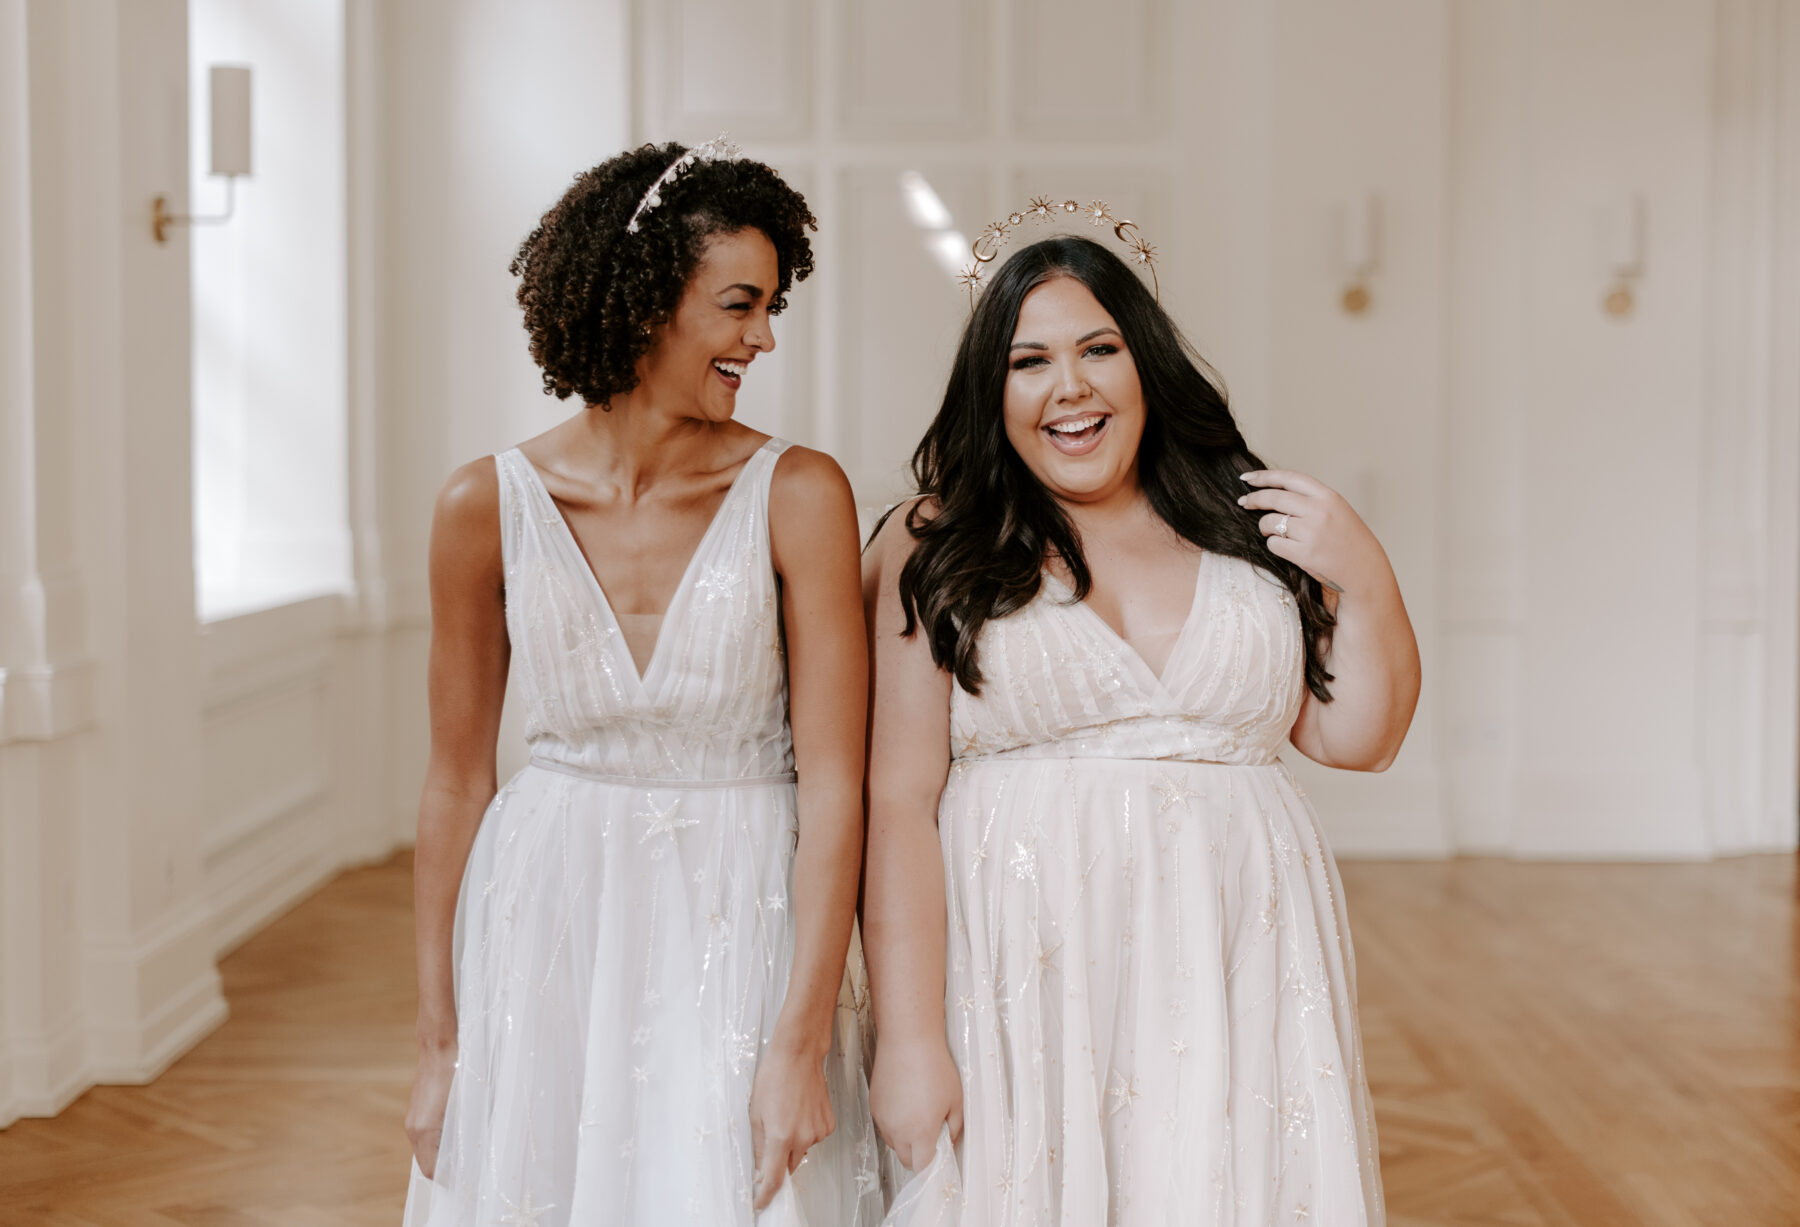 New Dress Styles at Lavender Park Bridal featured on Nashville Bride Guide